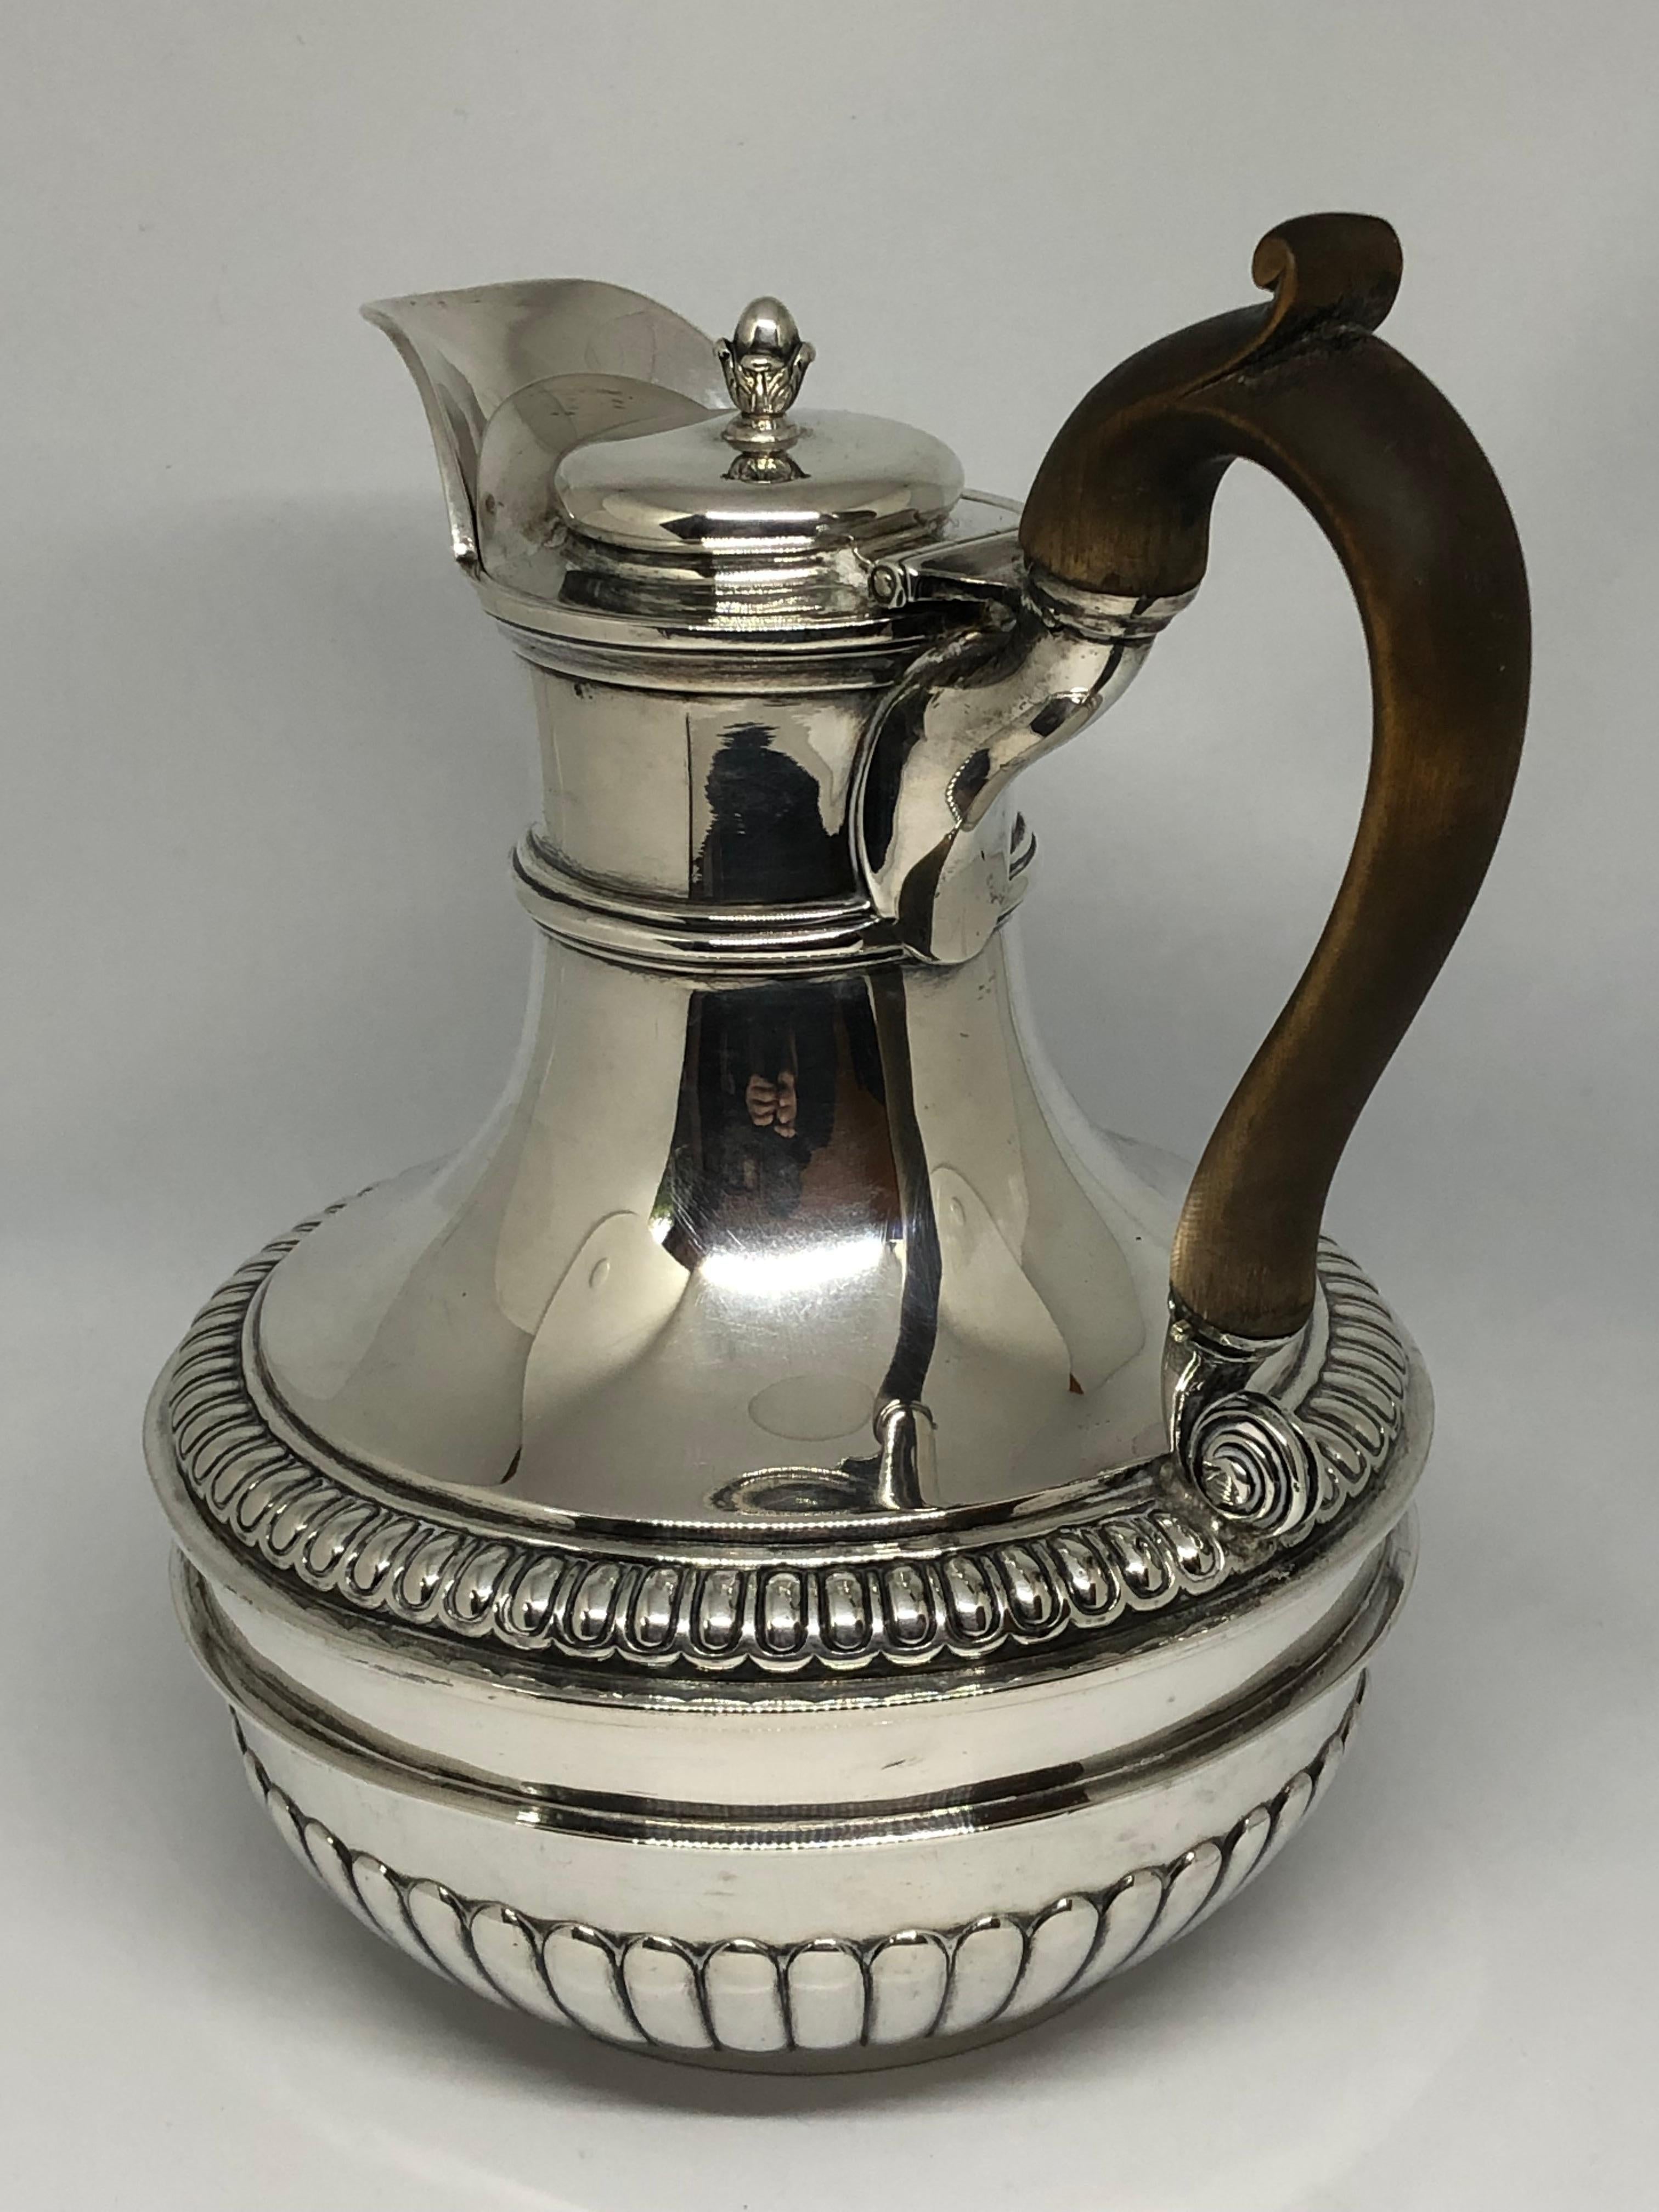 By the most famous and sought-after goldsmith and silversmith of the nineteenth century - Paul Storr.

A George III Regency silver jug on stand. Decorated with gadrooning, the jug with fluting to the lower half. Atop a stand supported by three